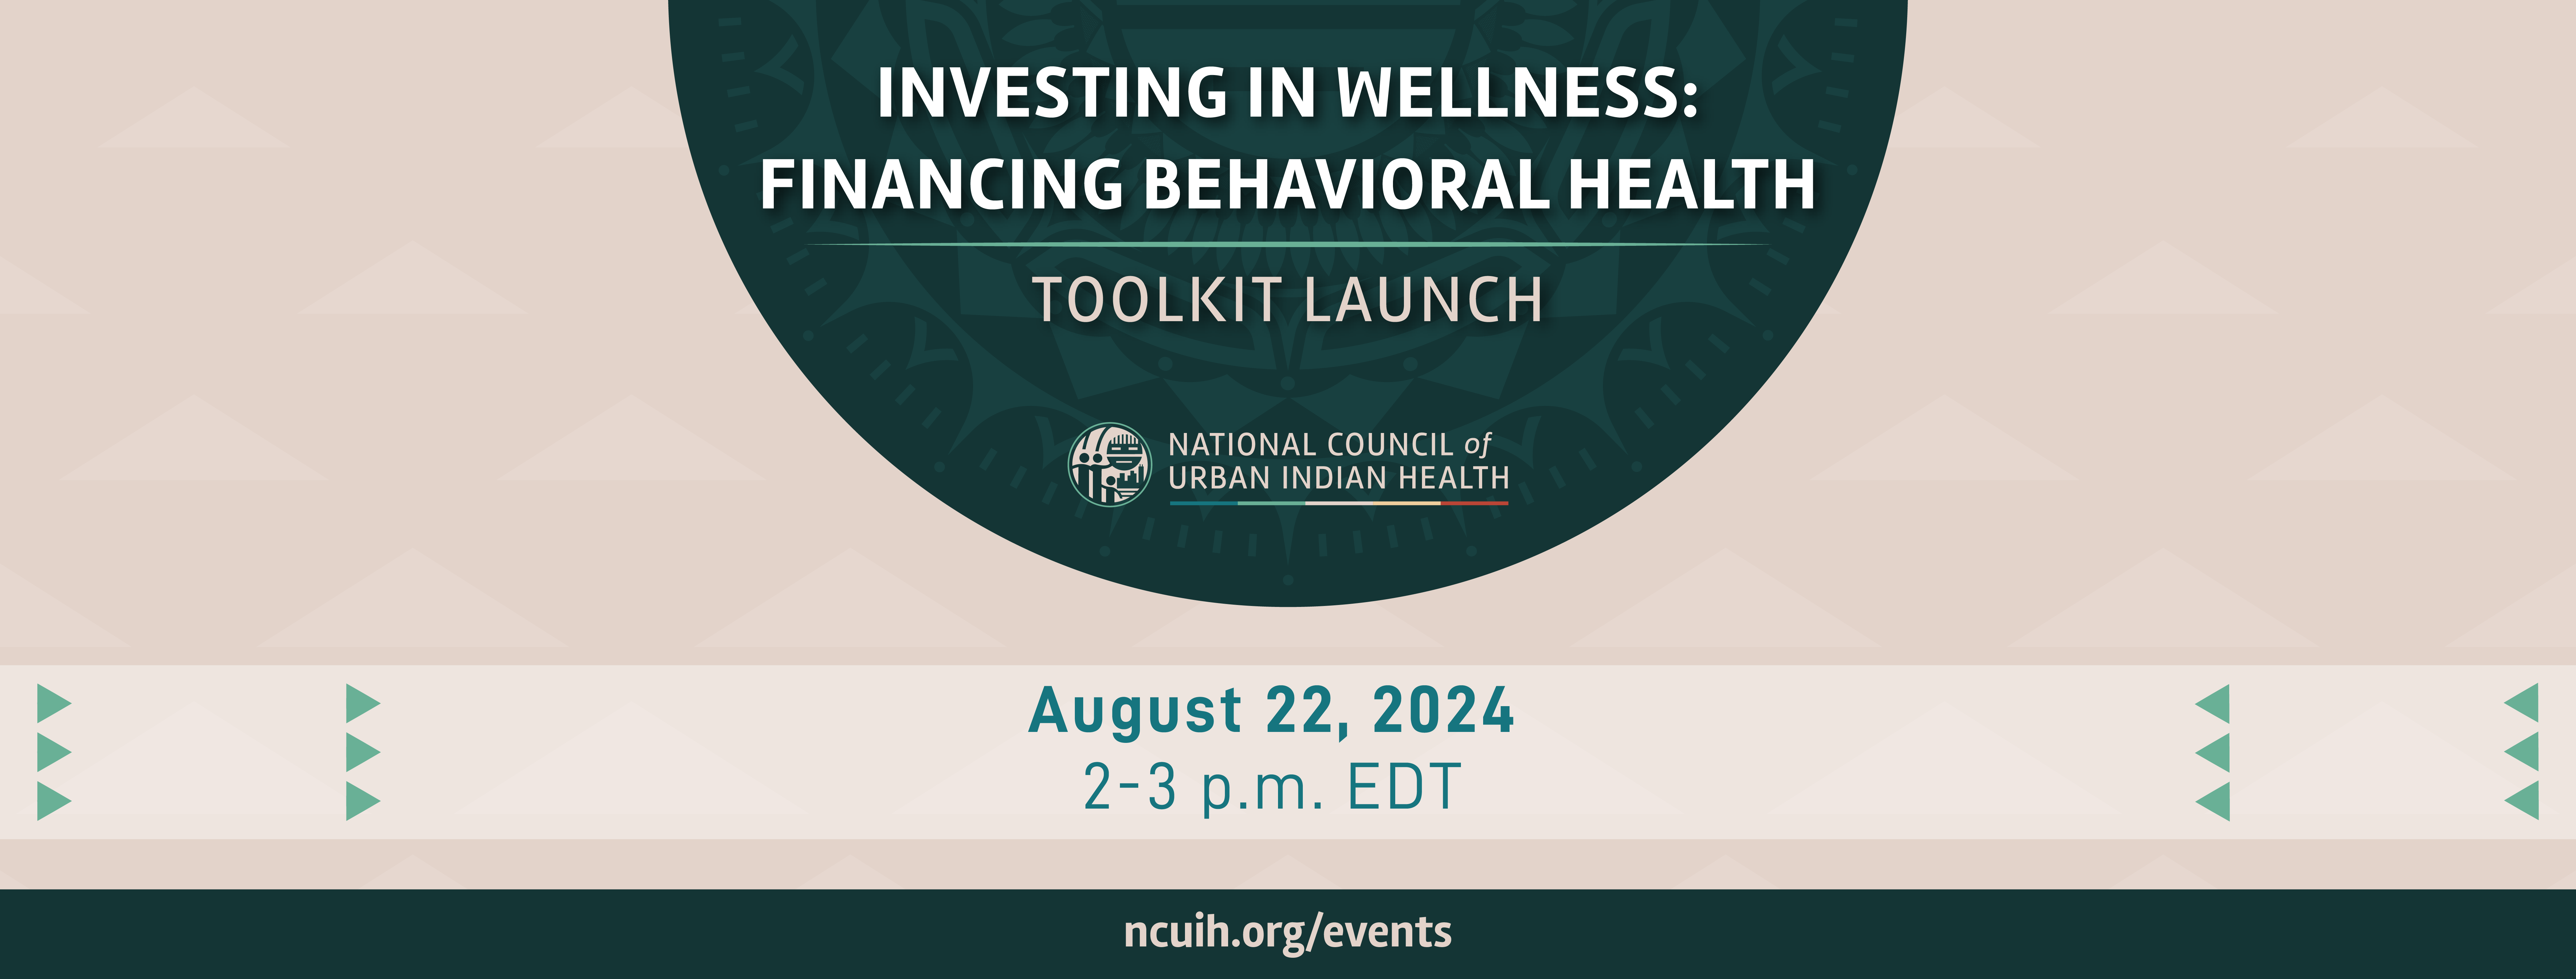 Investing in Wellness: Financing Behavioral Health Toolkit Launch